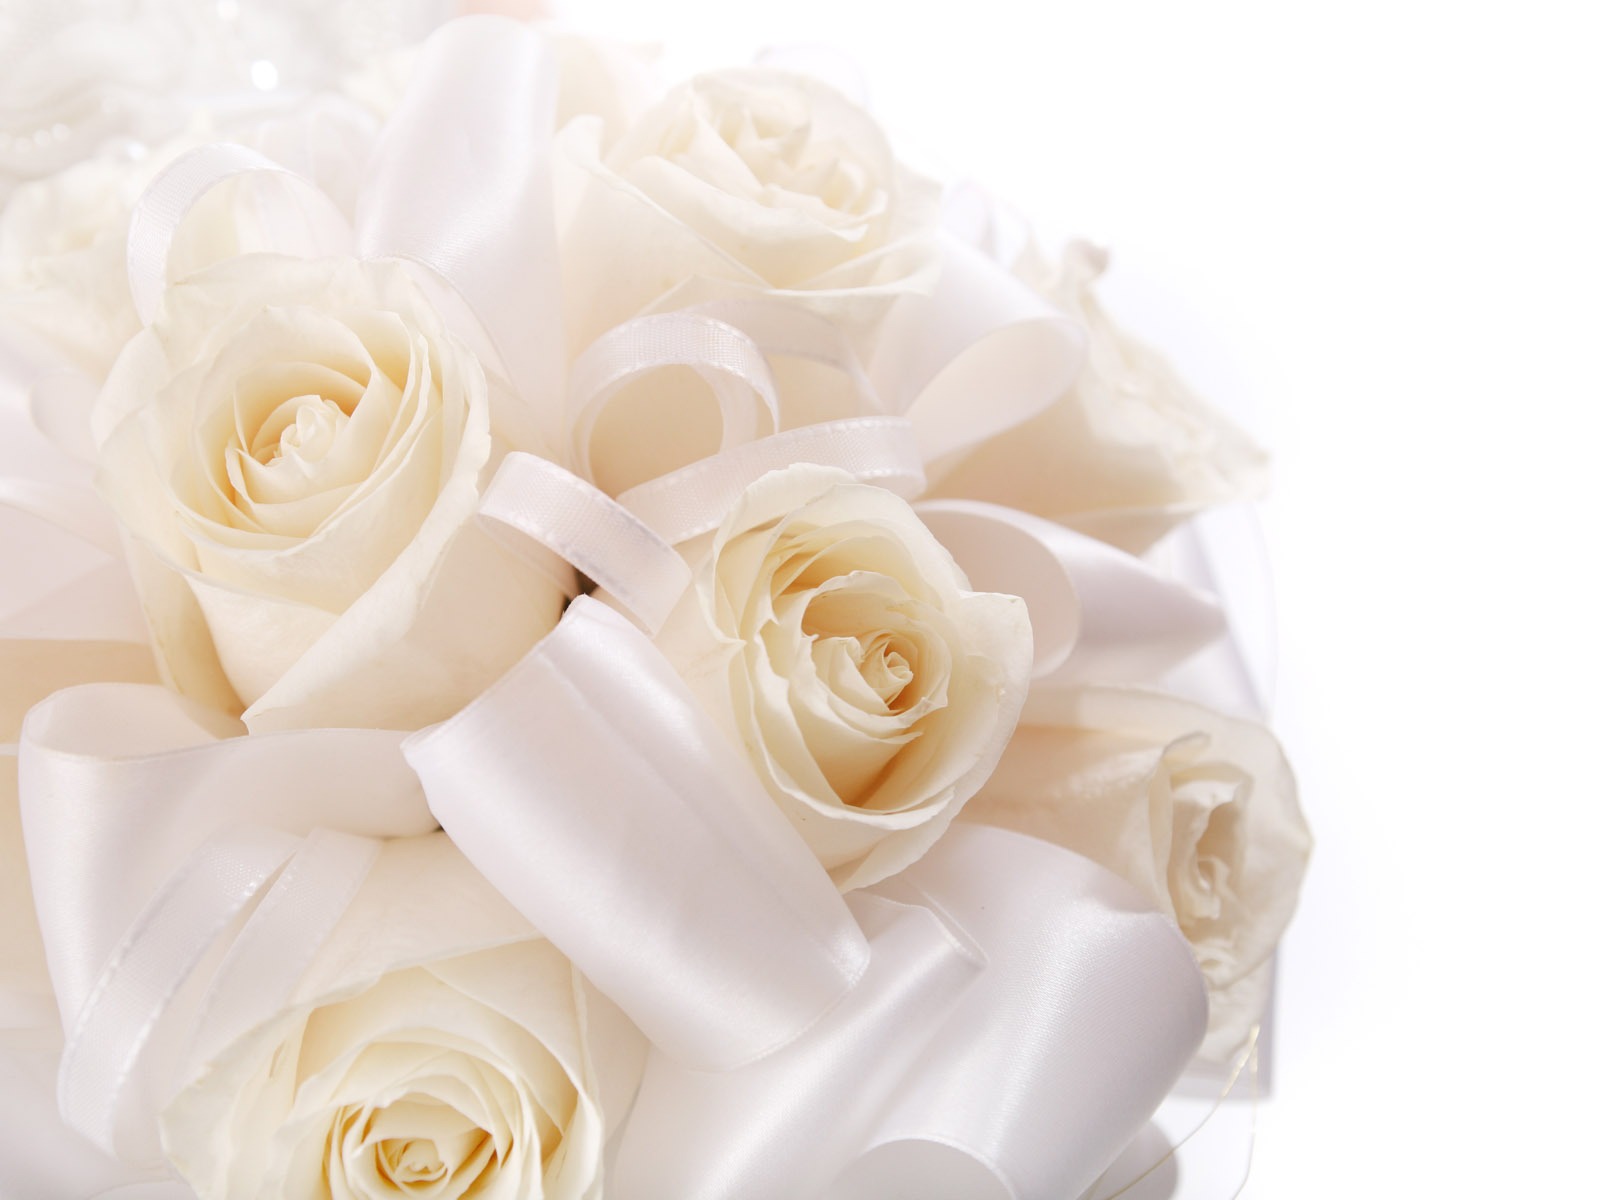 Weddings and Flowers wallpaper (1) #4 - 1600x1200